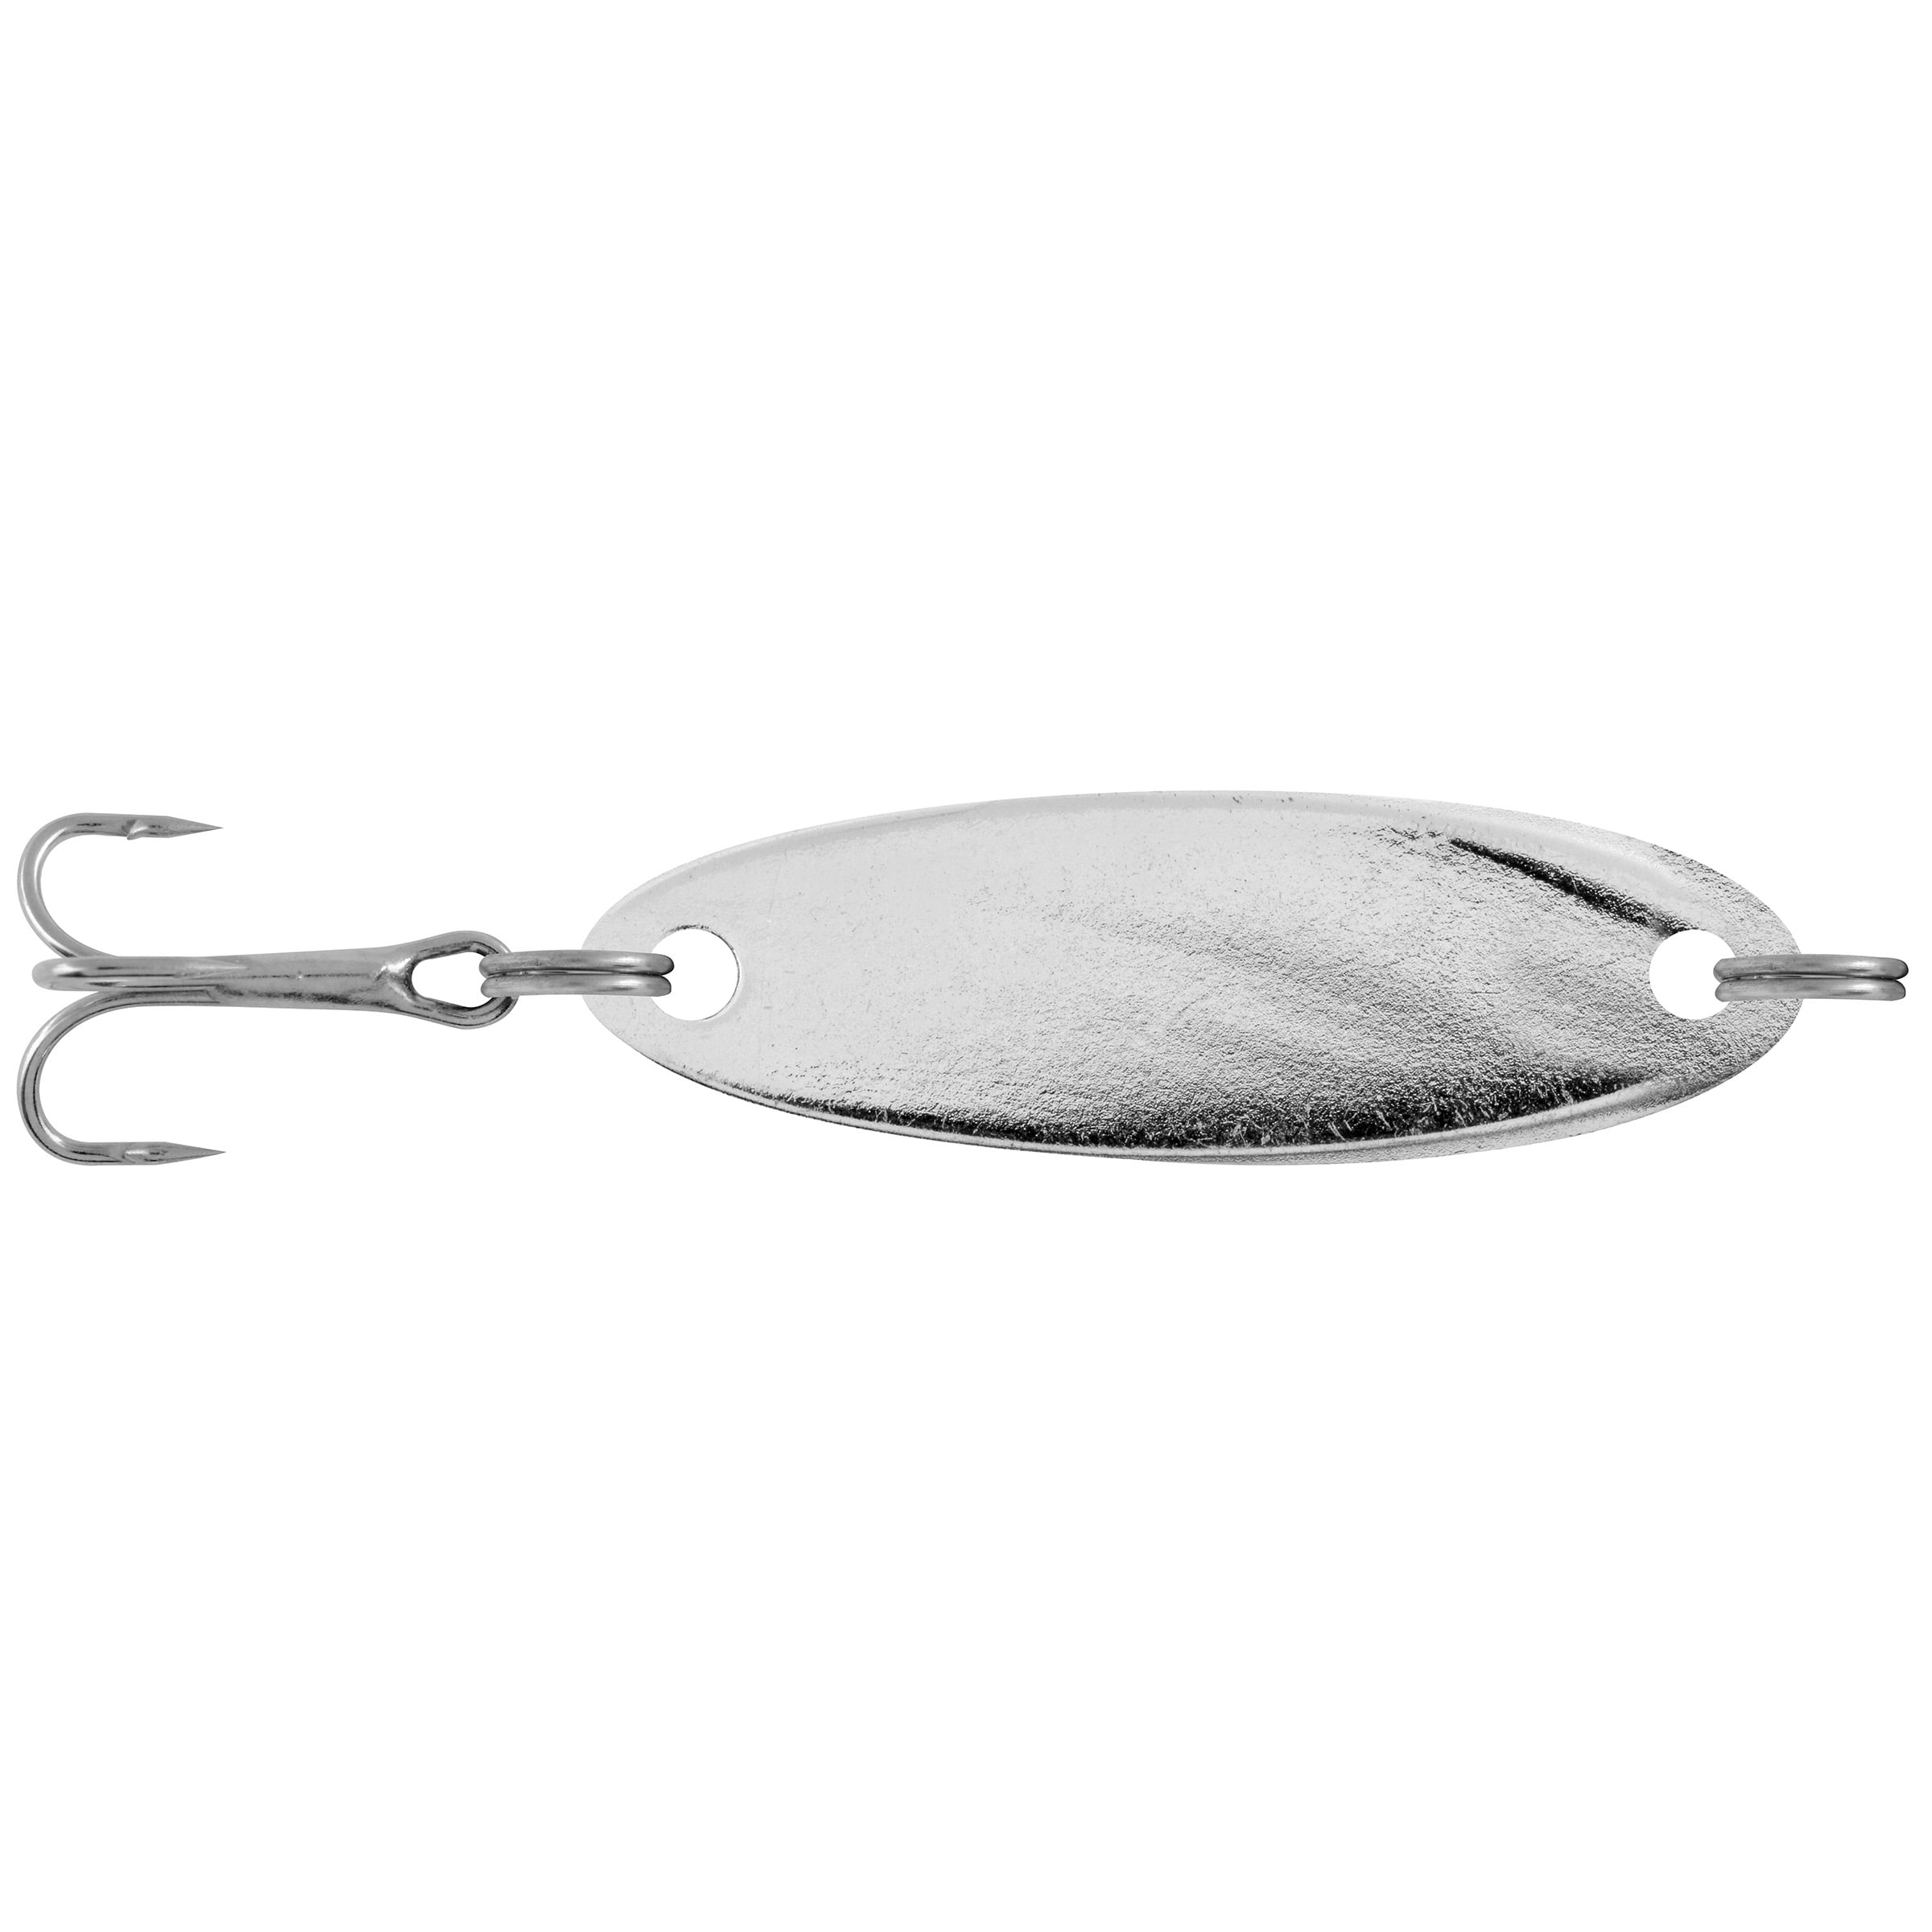 South Bend Kast-A-Way Shud-L-Spoon Freshwater Fishing Lure, Rainbow Trout,  1/4 Ounce, Fishing Spoons